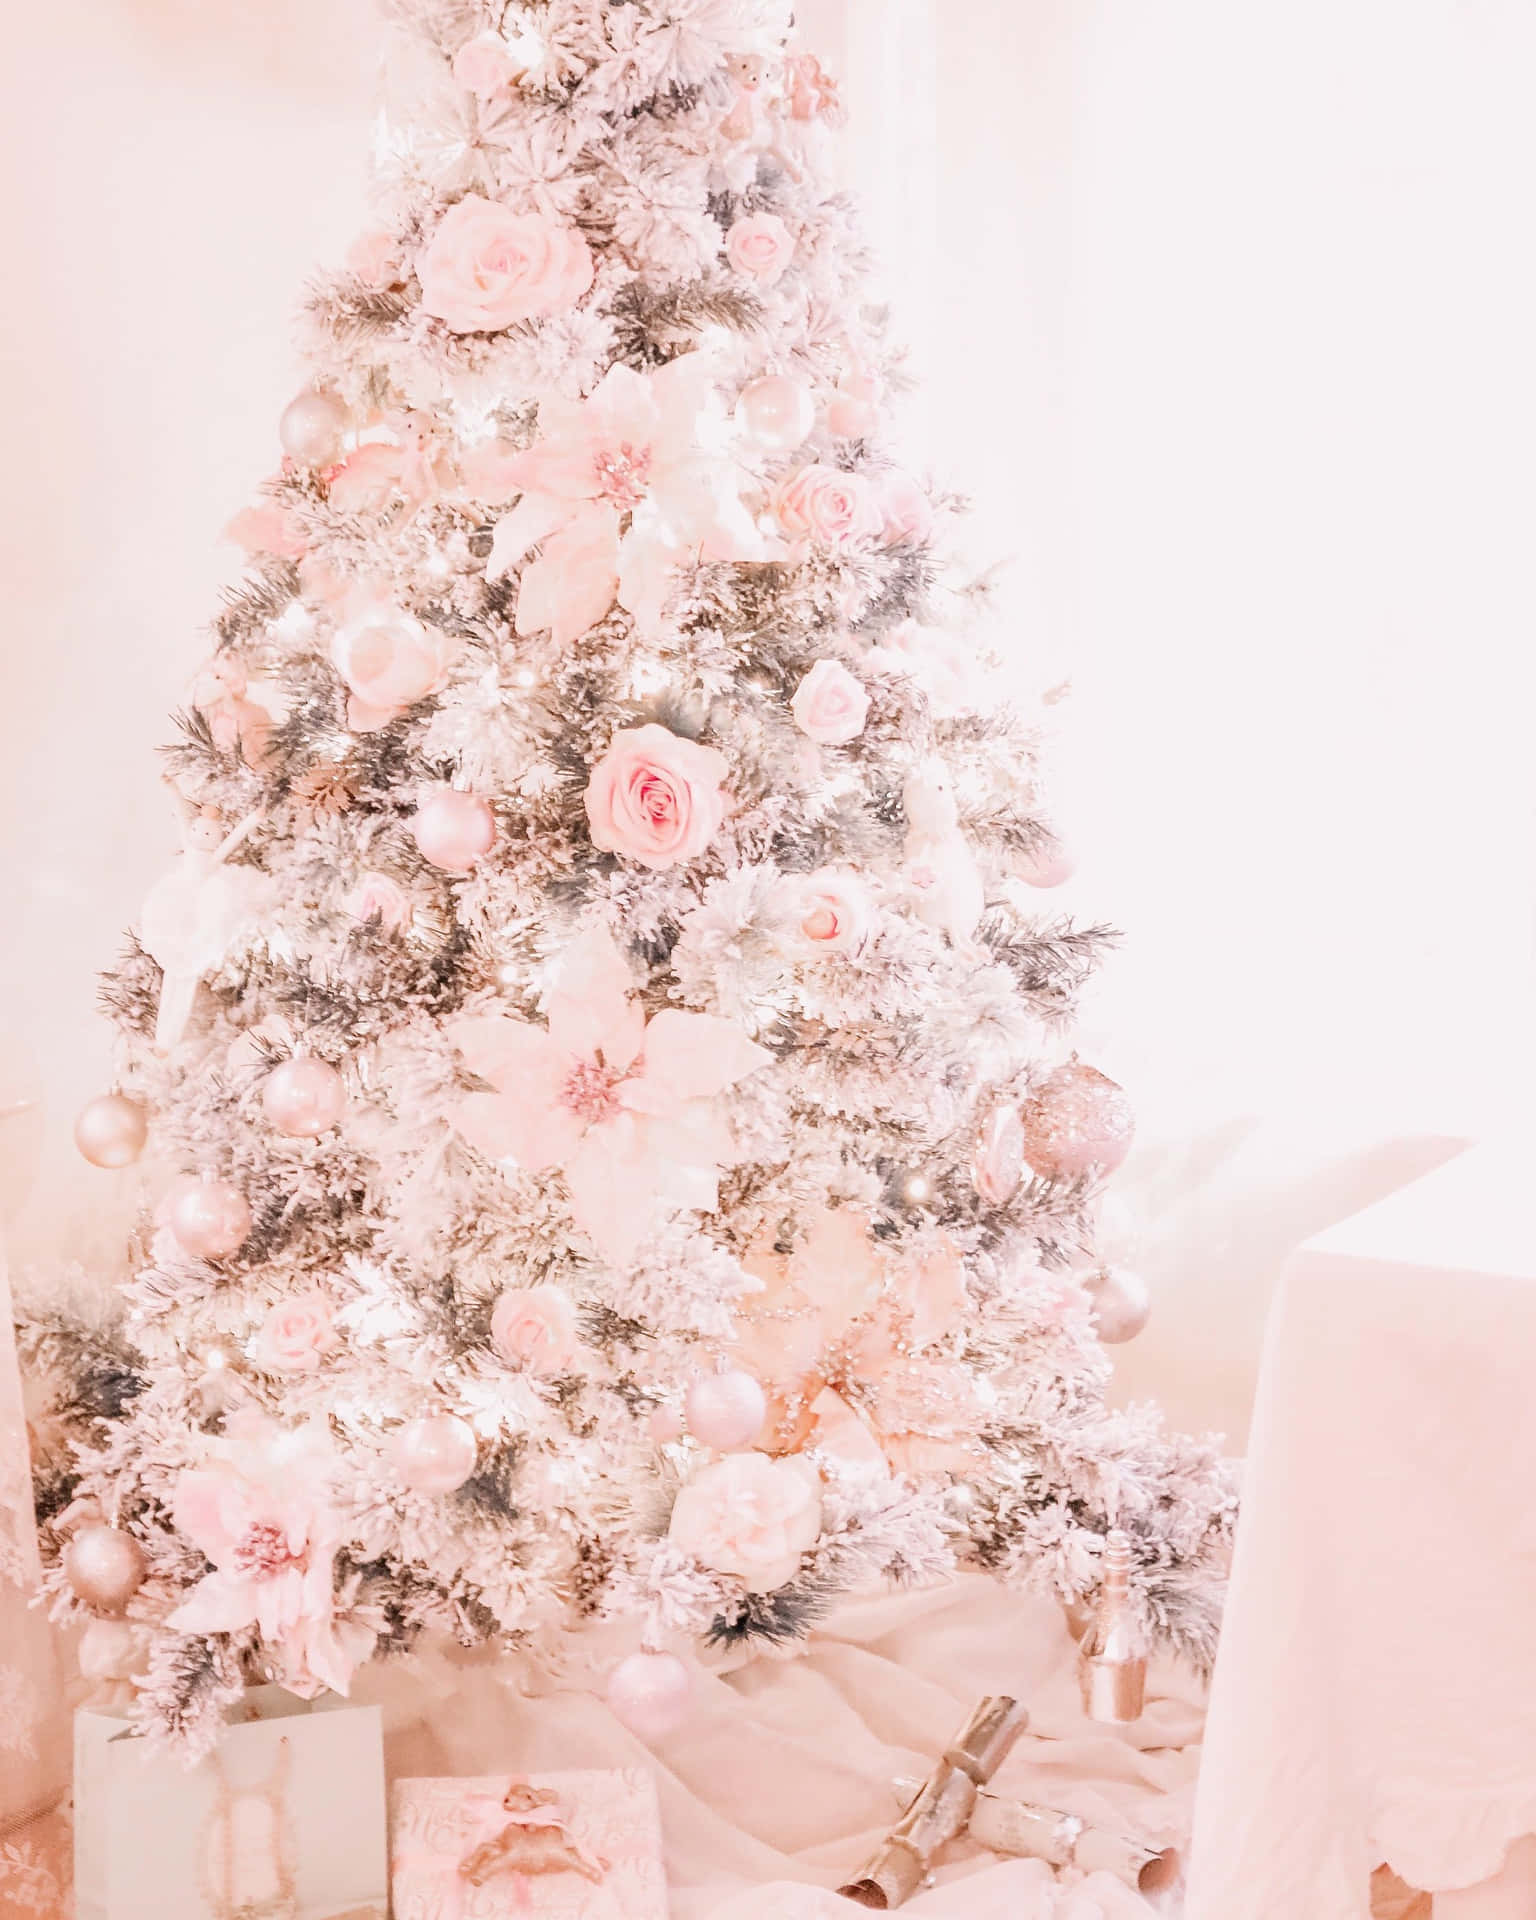 Brighten Up Your Festive Season With This Sweet Pink Christmas Tree Wallpaper